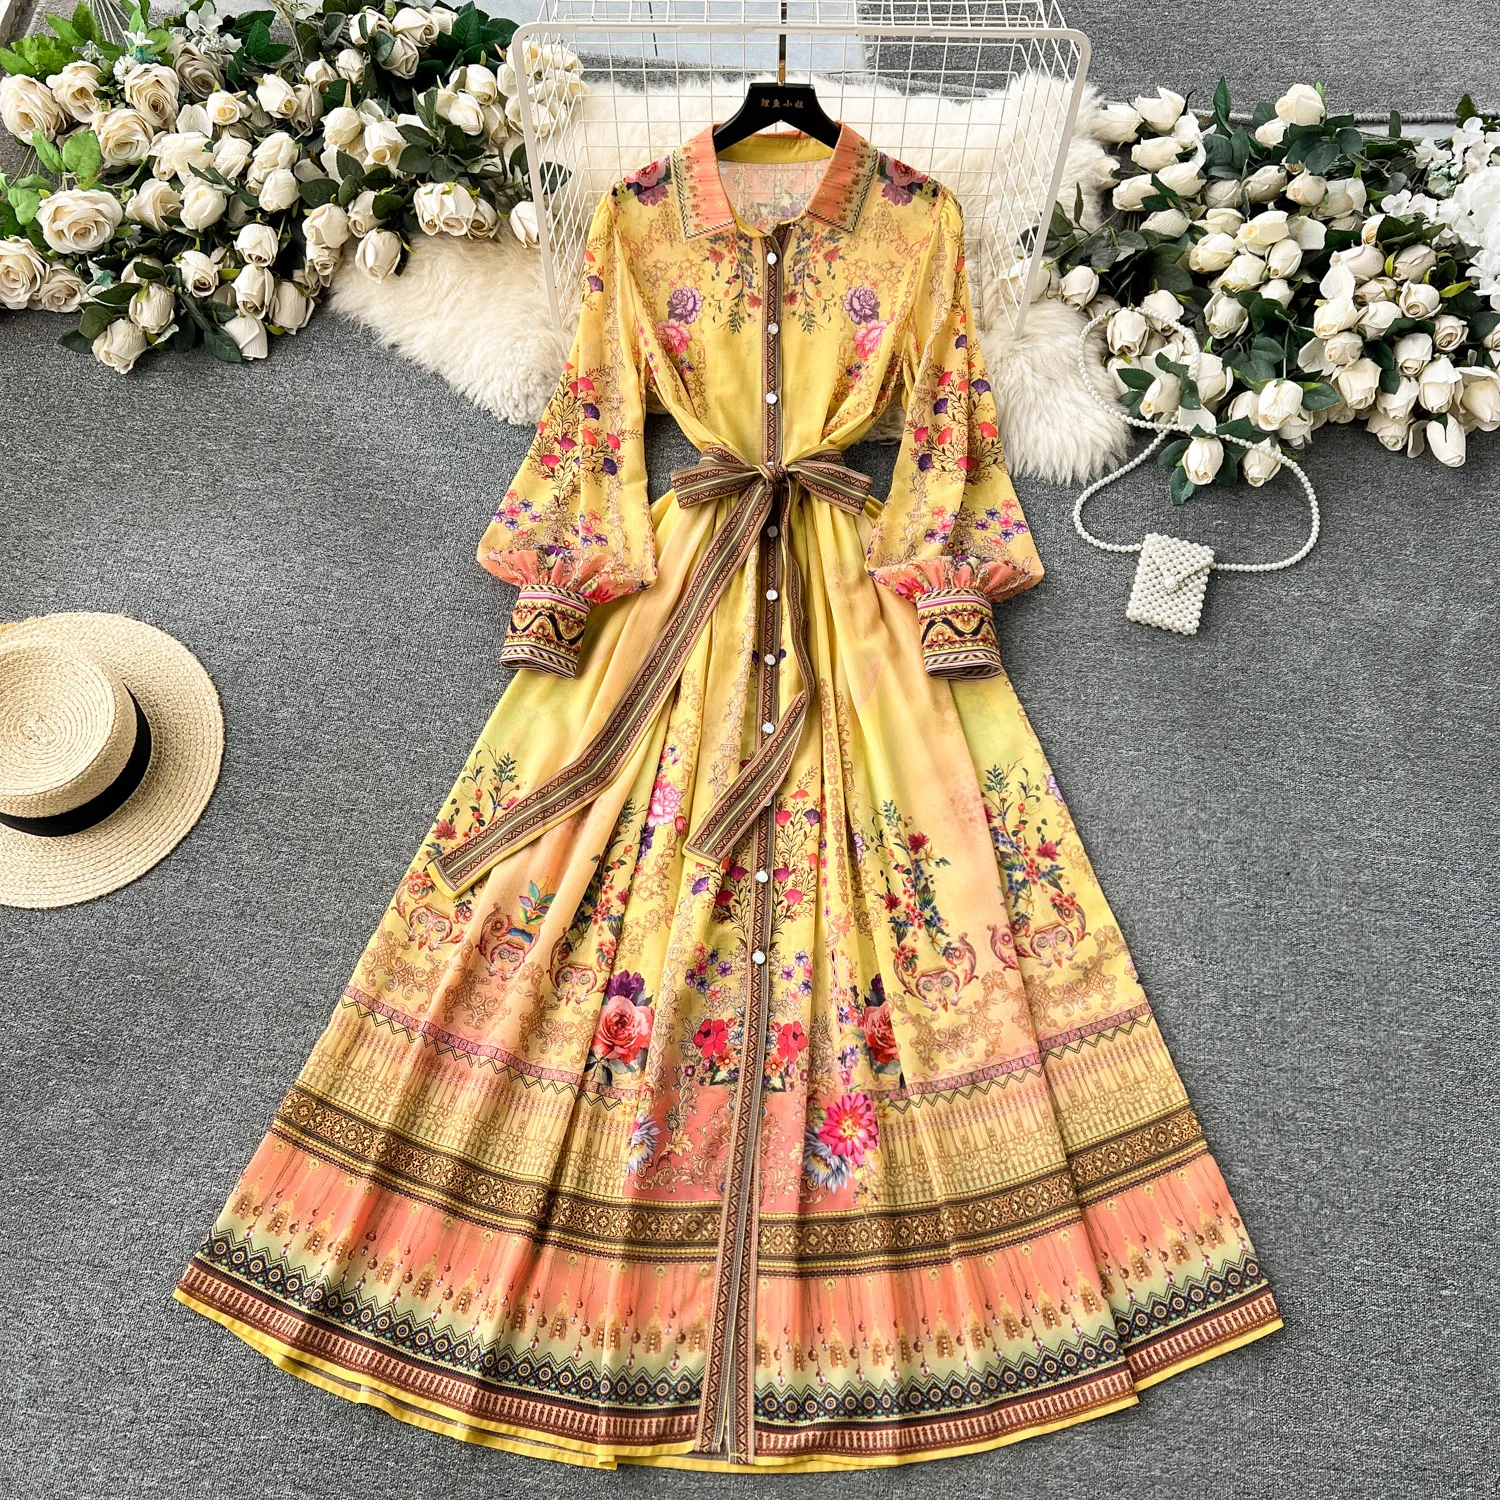 French retro court style dress, temperament, shirt collar, buckle and tie up, slim fit, long printed chiffon dress for women